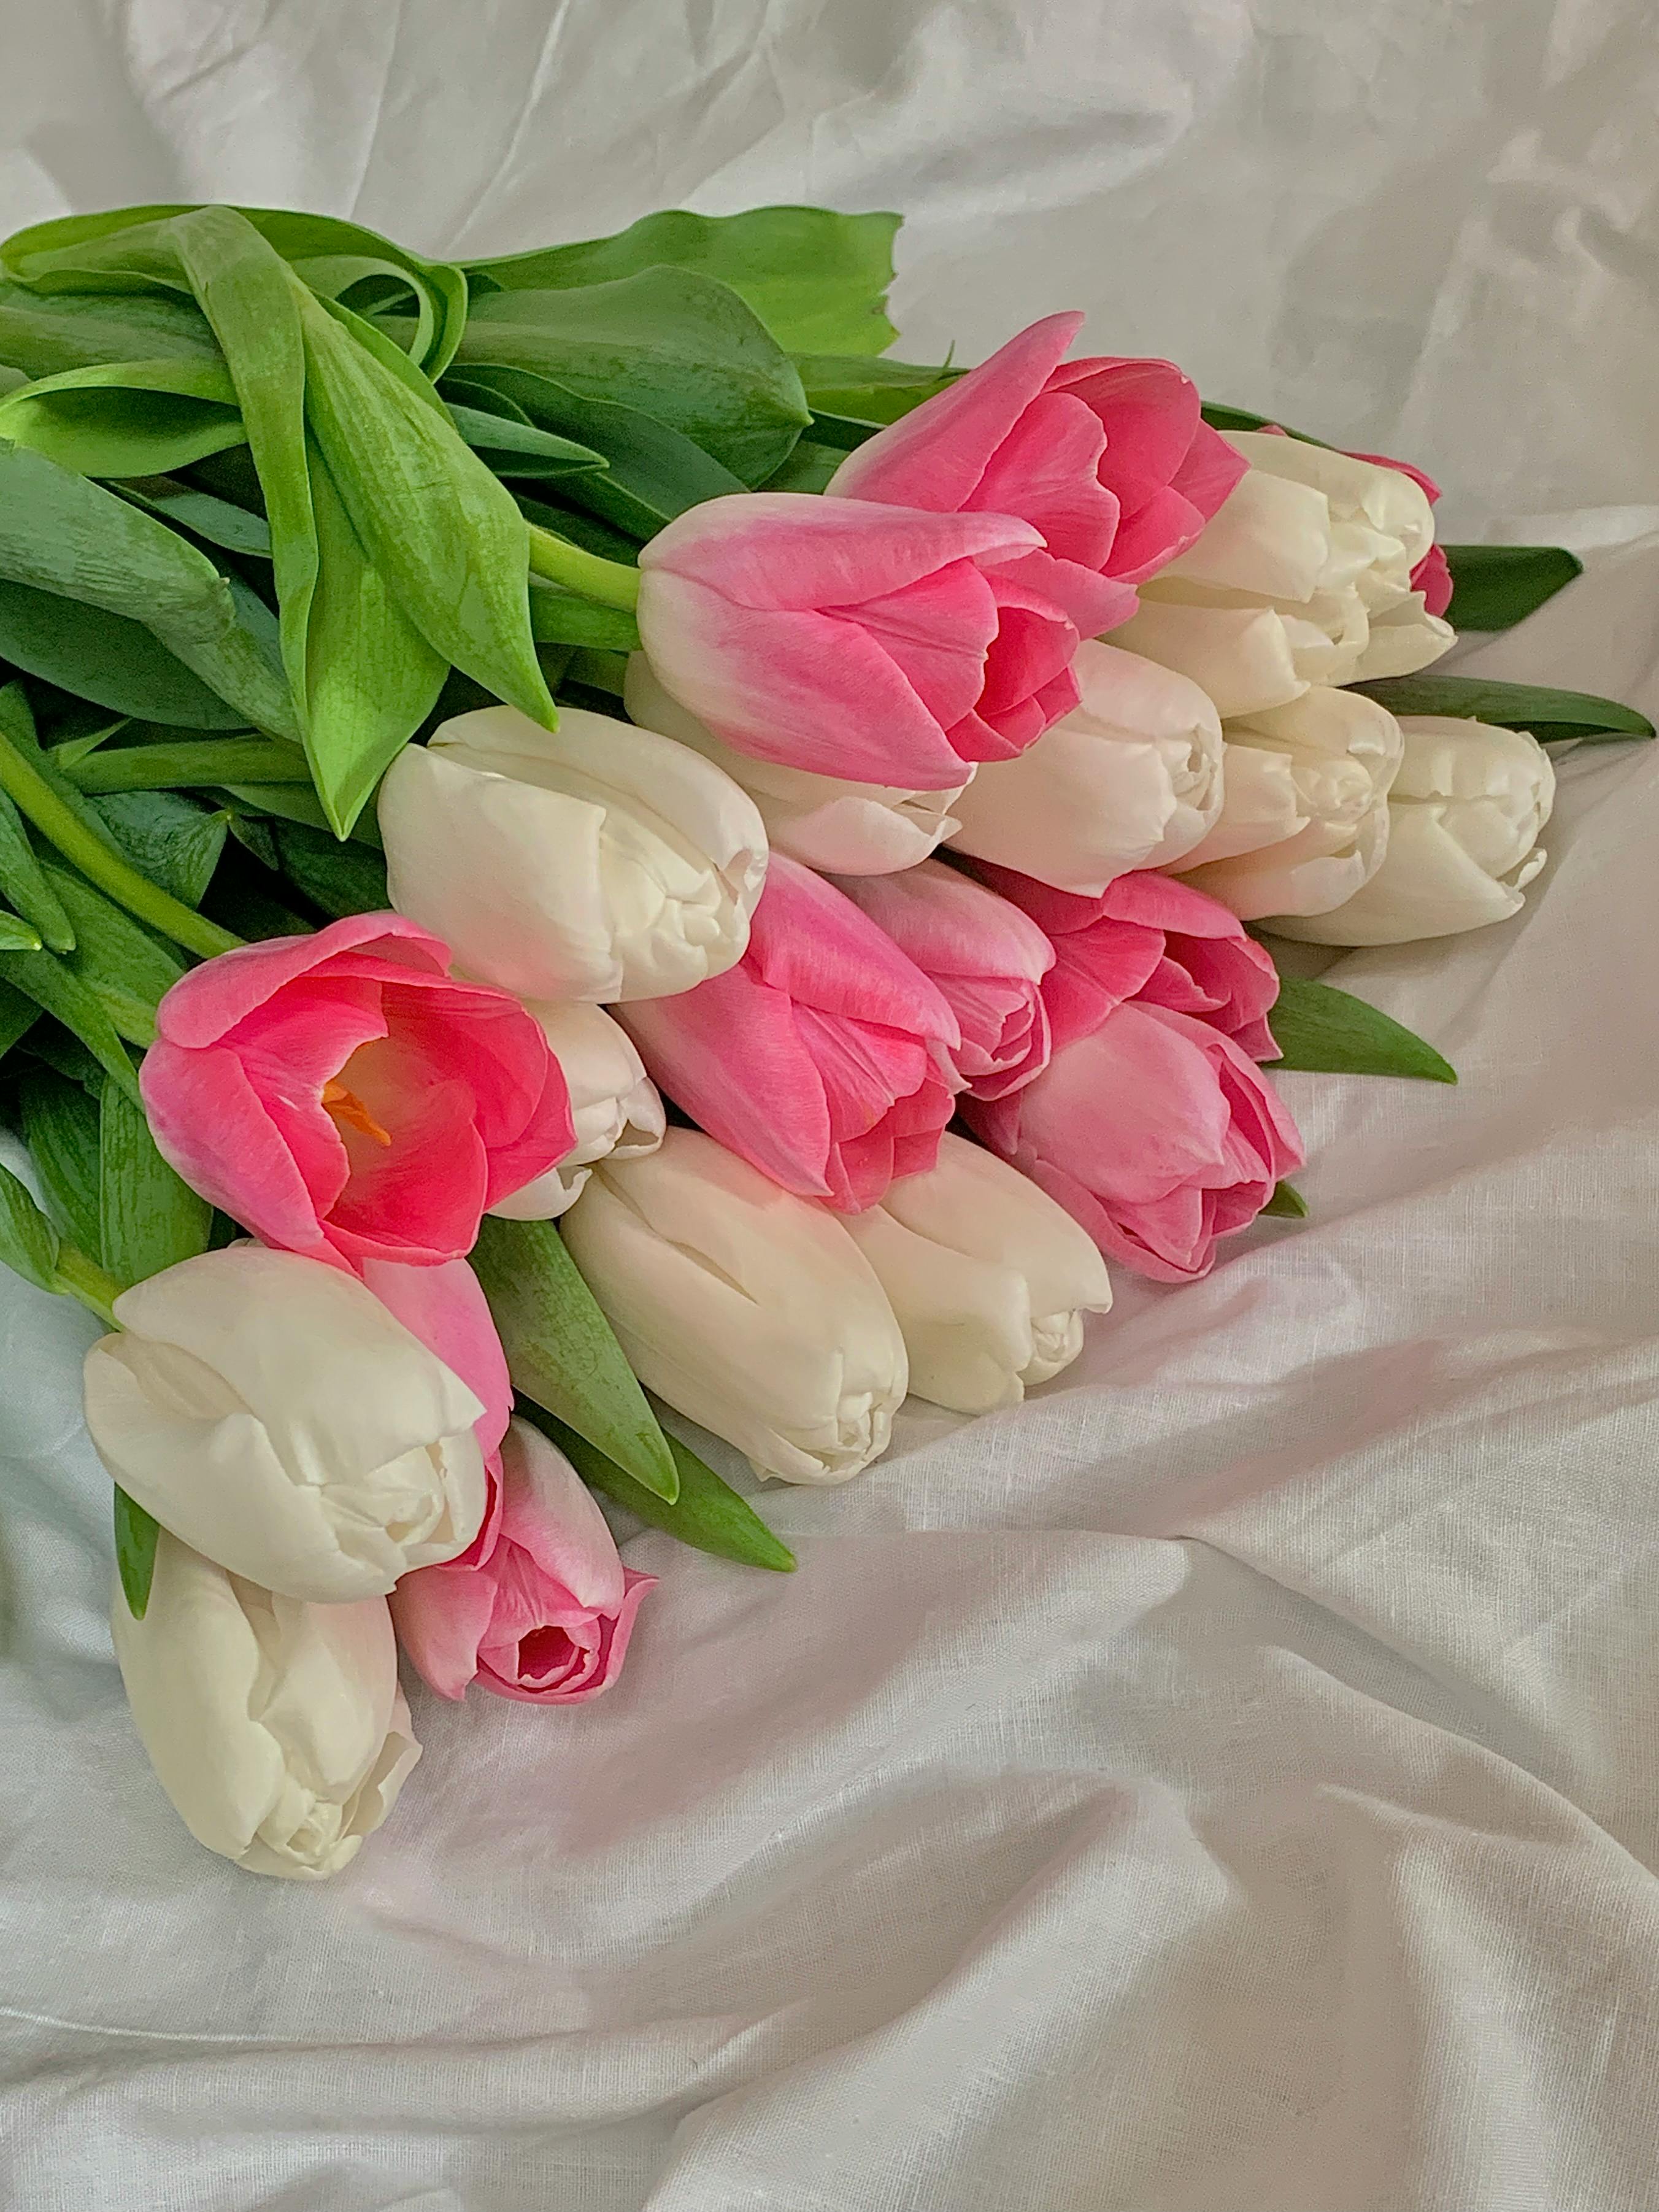 Pink Tulips Photos The Best